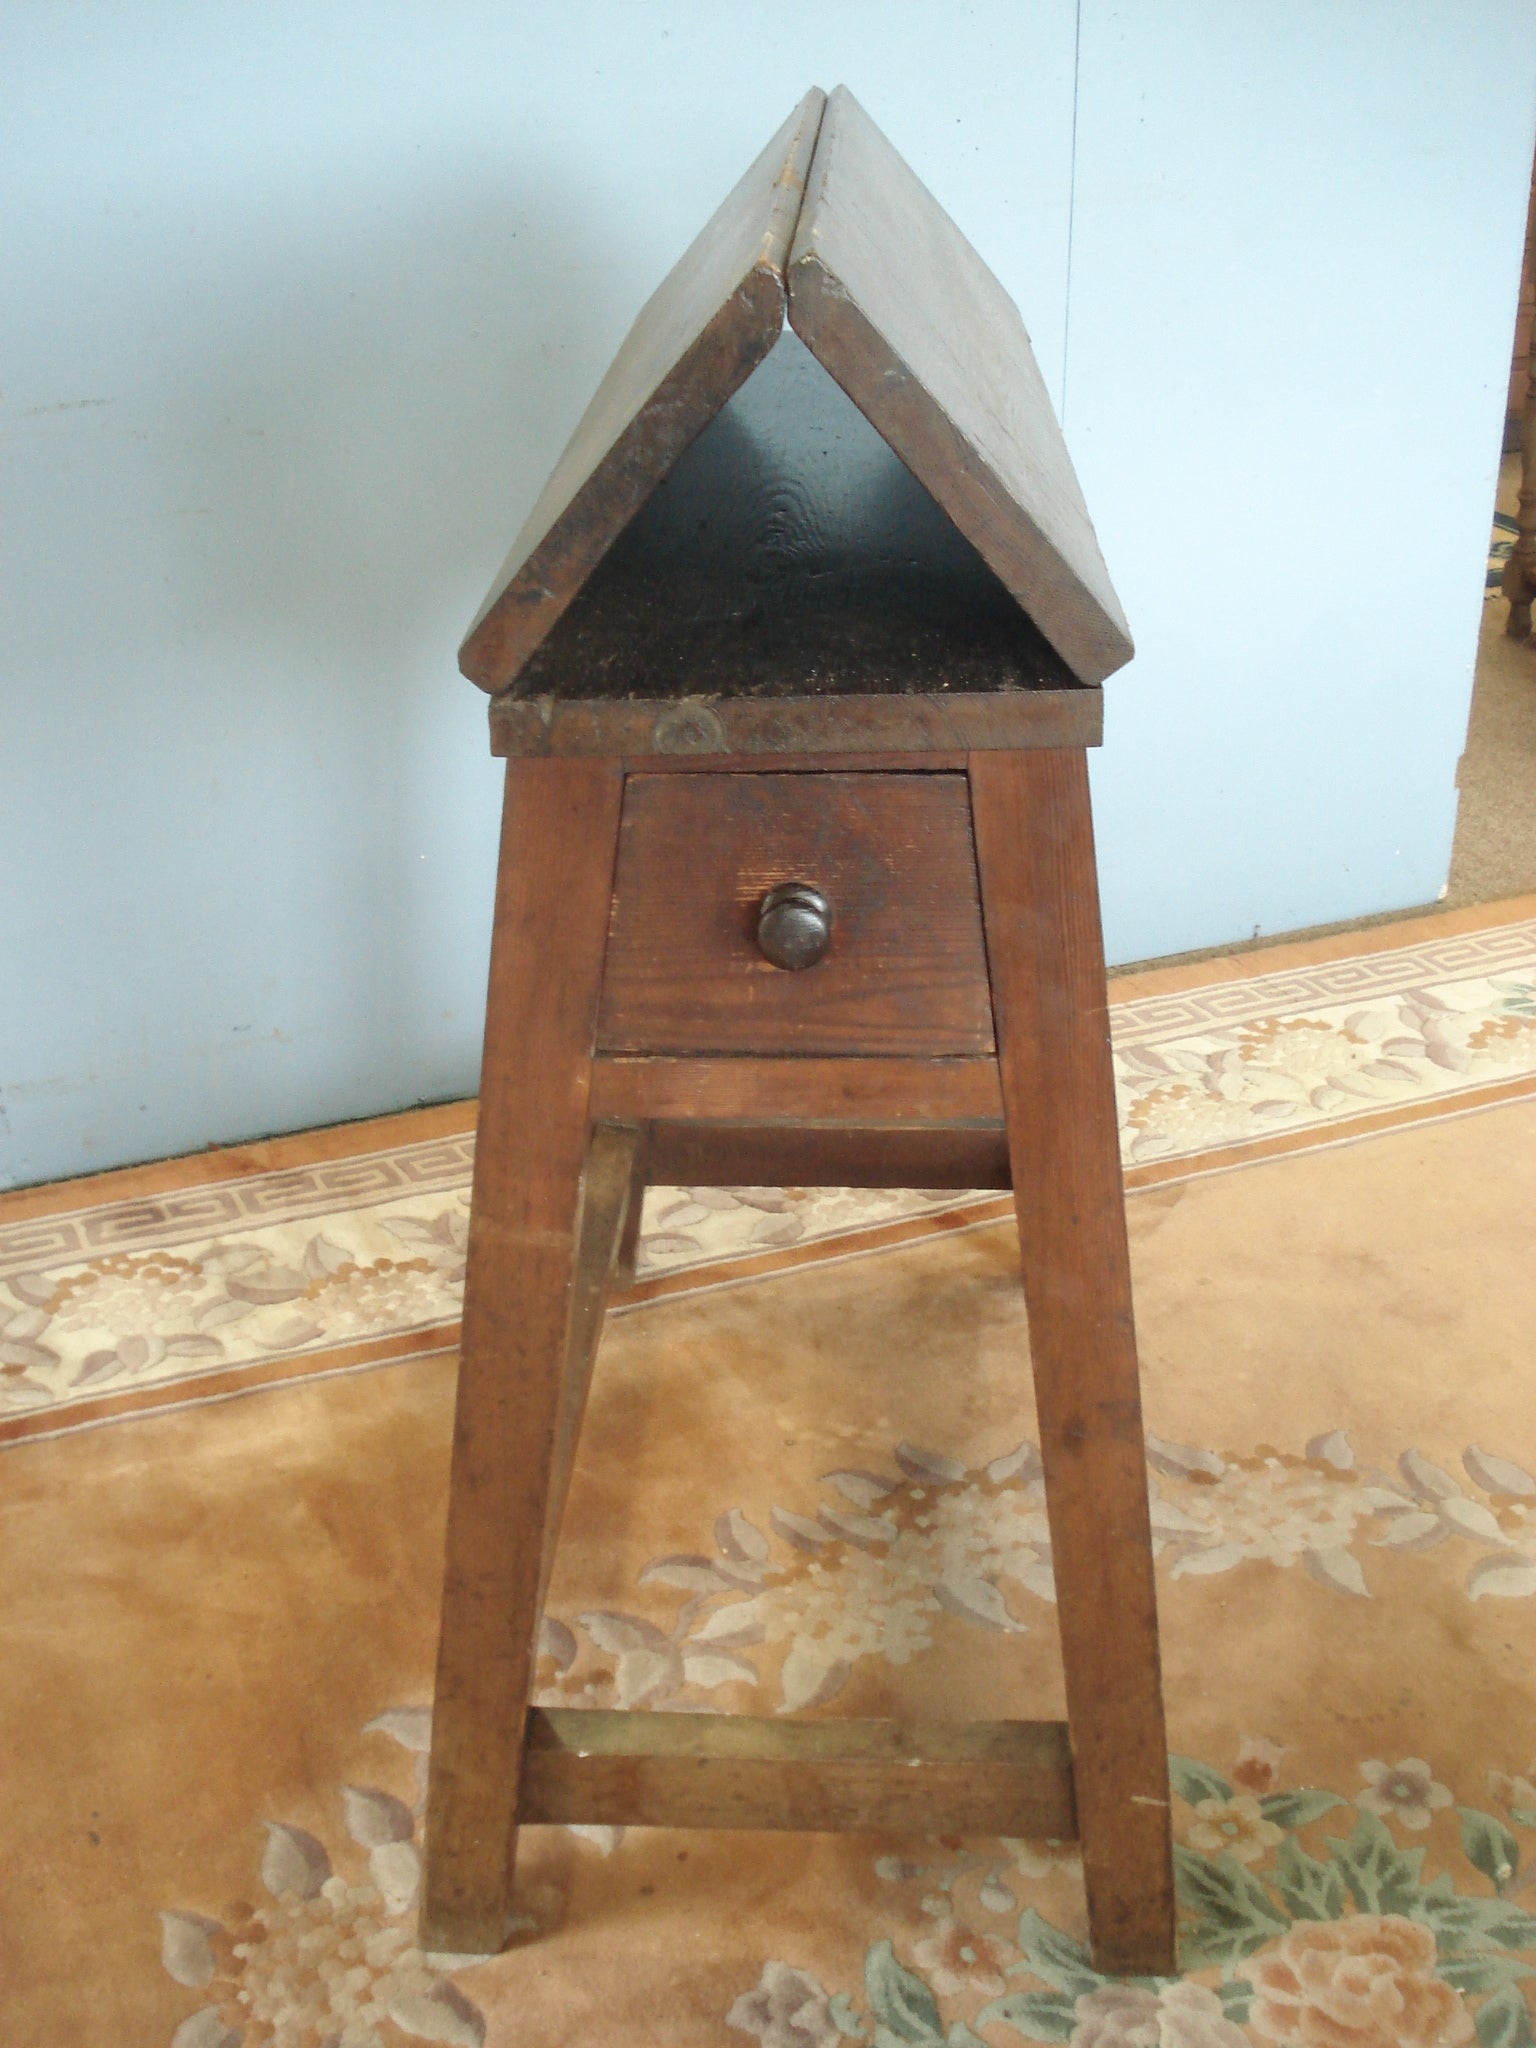 19th century saddle stand converts to dropleaf table. Metamorphic equestrian.